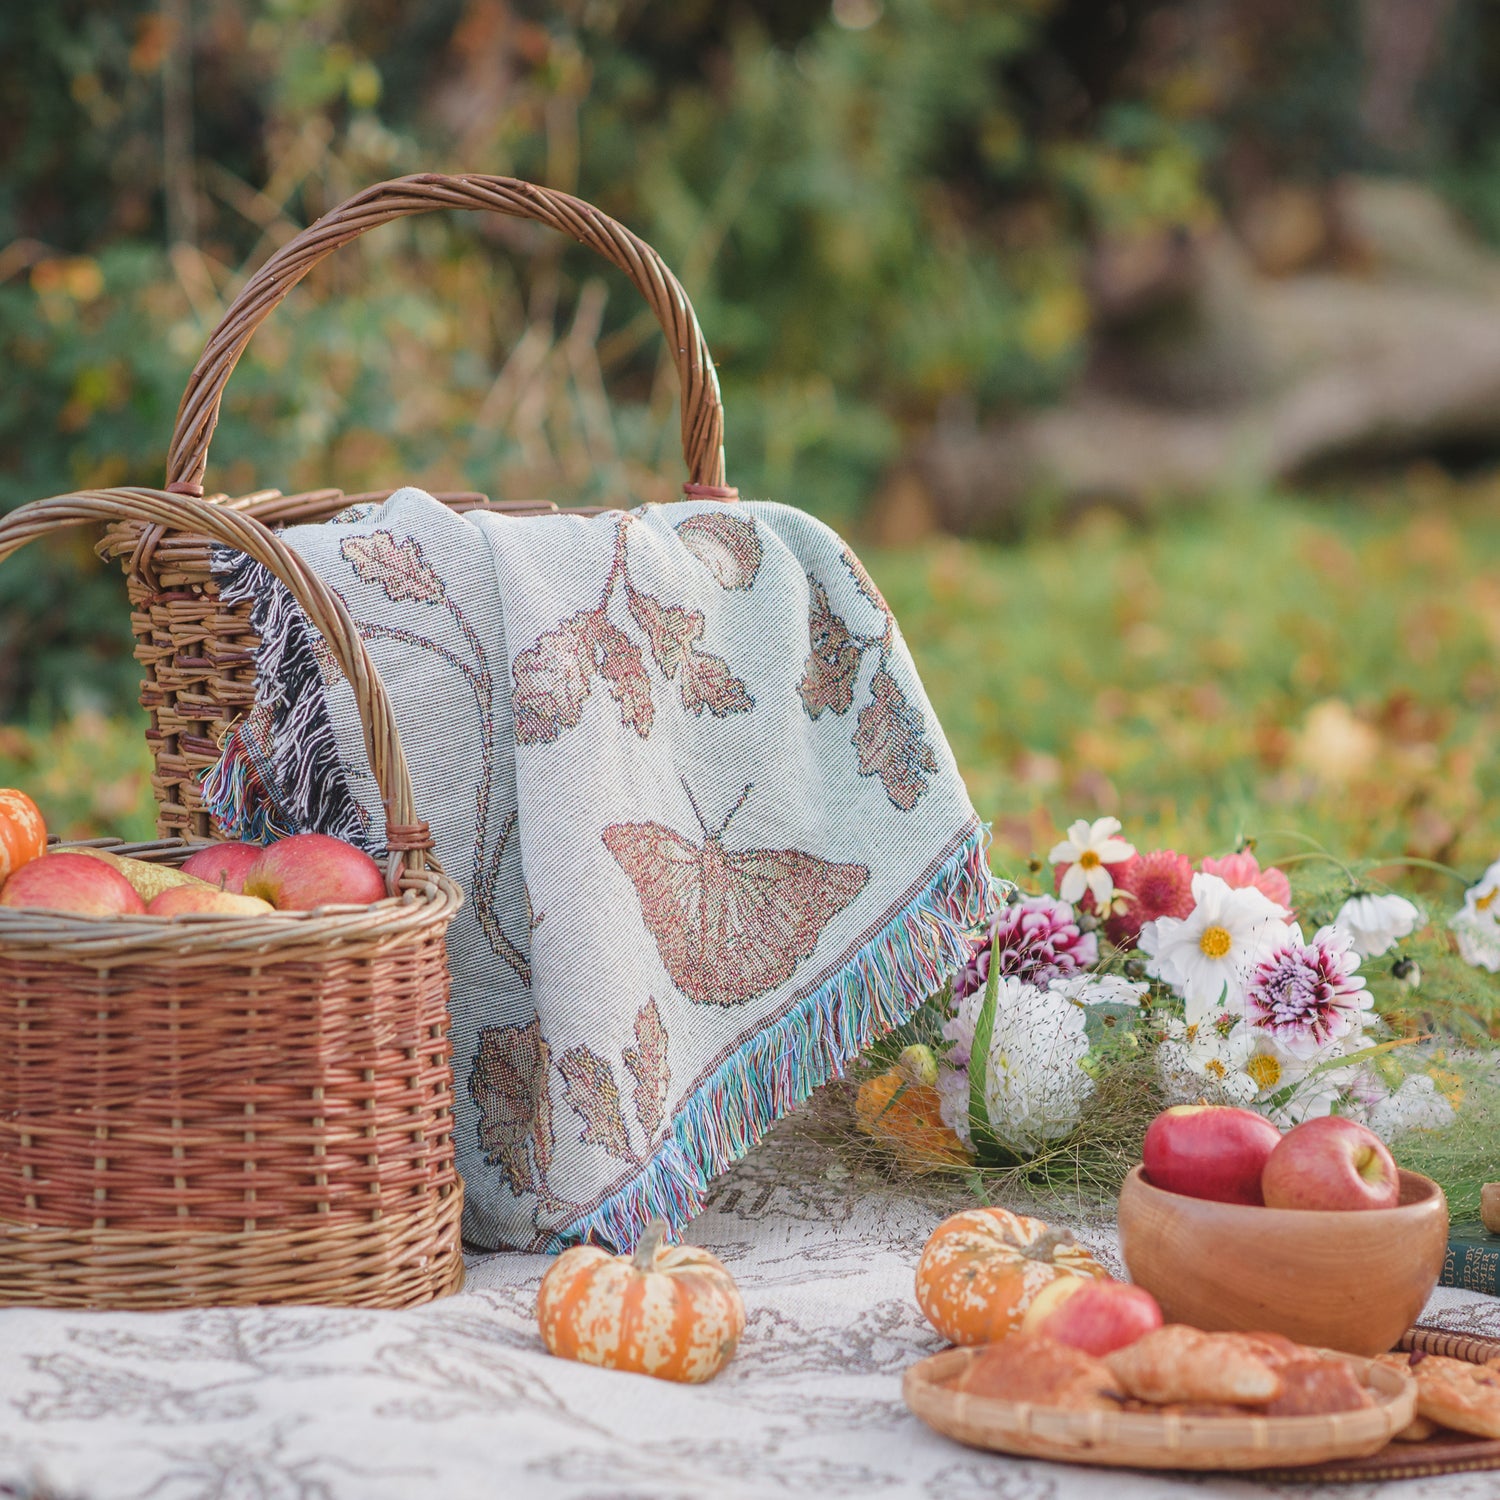 a basket of apples and a basket of bread on a Wild Oak Wrap Blanket by Arcana.